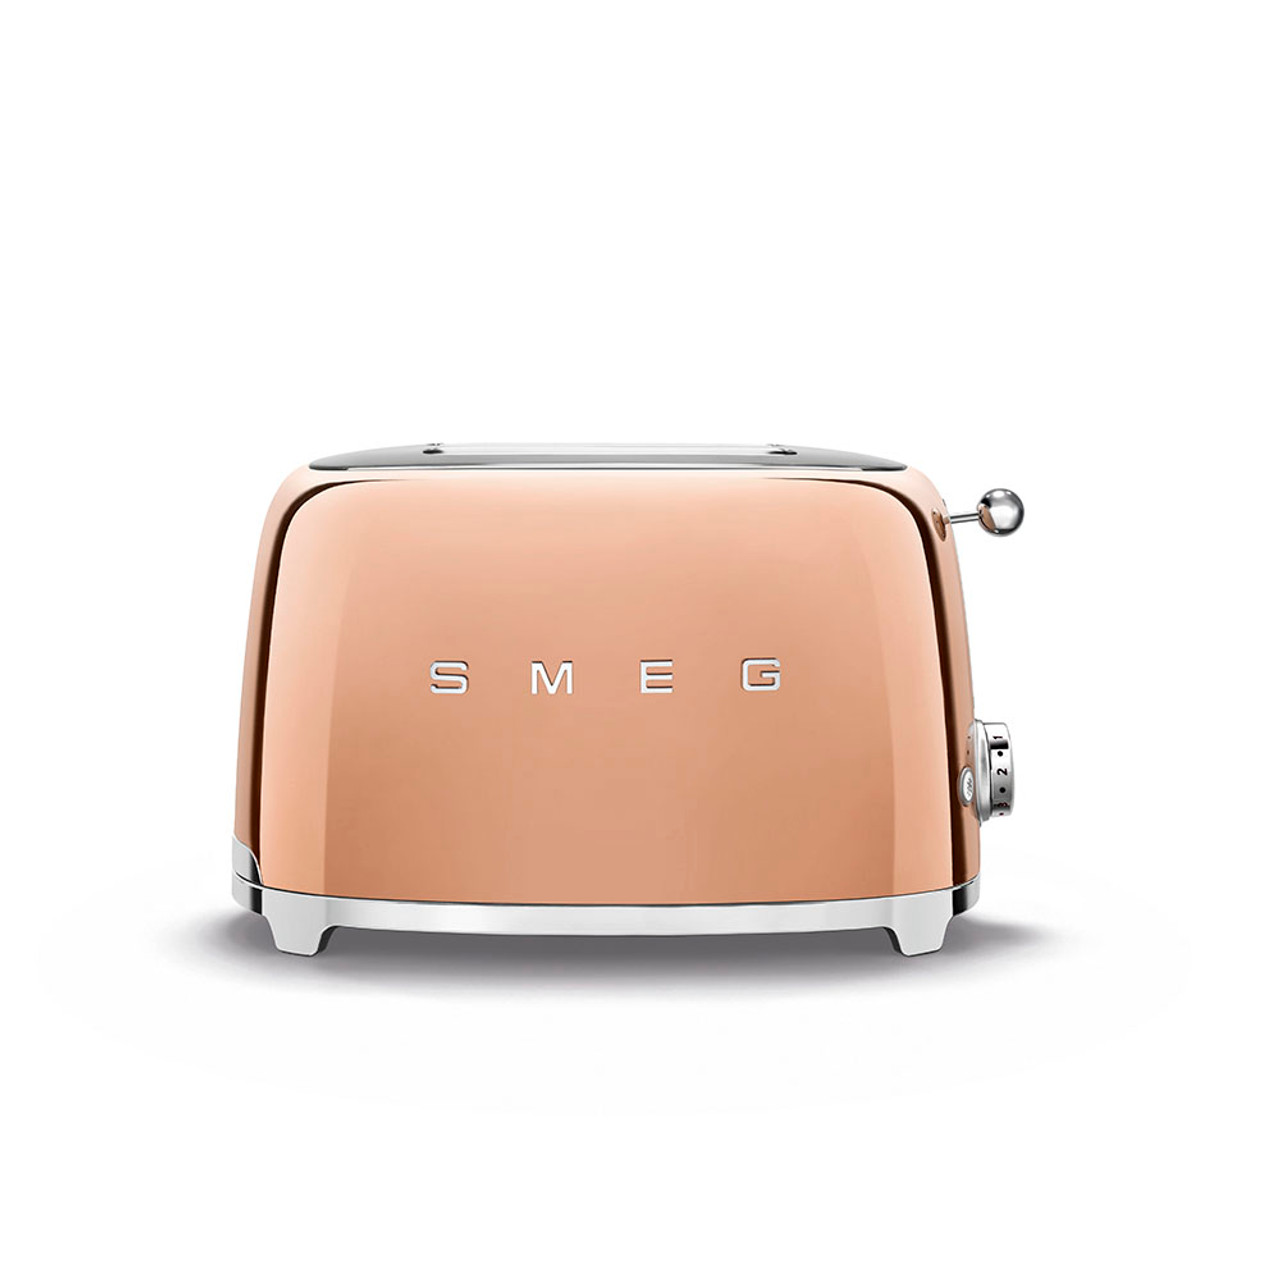 https://cdn11.bigcommerce.com/s-hccytny0od/images/stencil/1280x1280/products/1219/11290/smeg-2-slice-toaster-rose-gold__78741.1594414413.jpg?c=2?imbypass=on